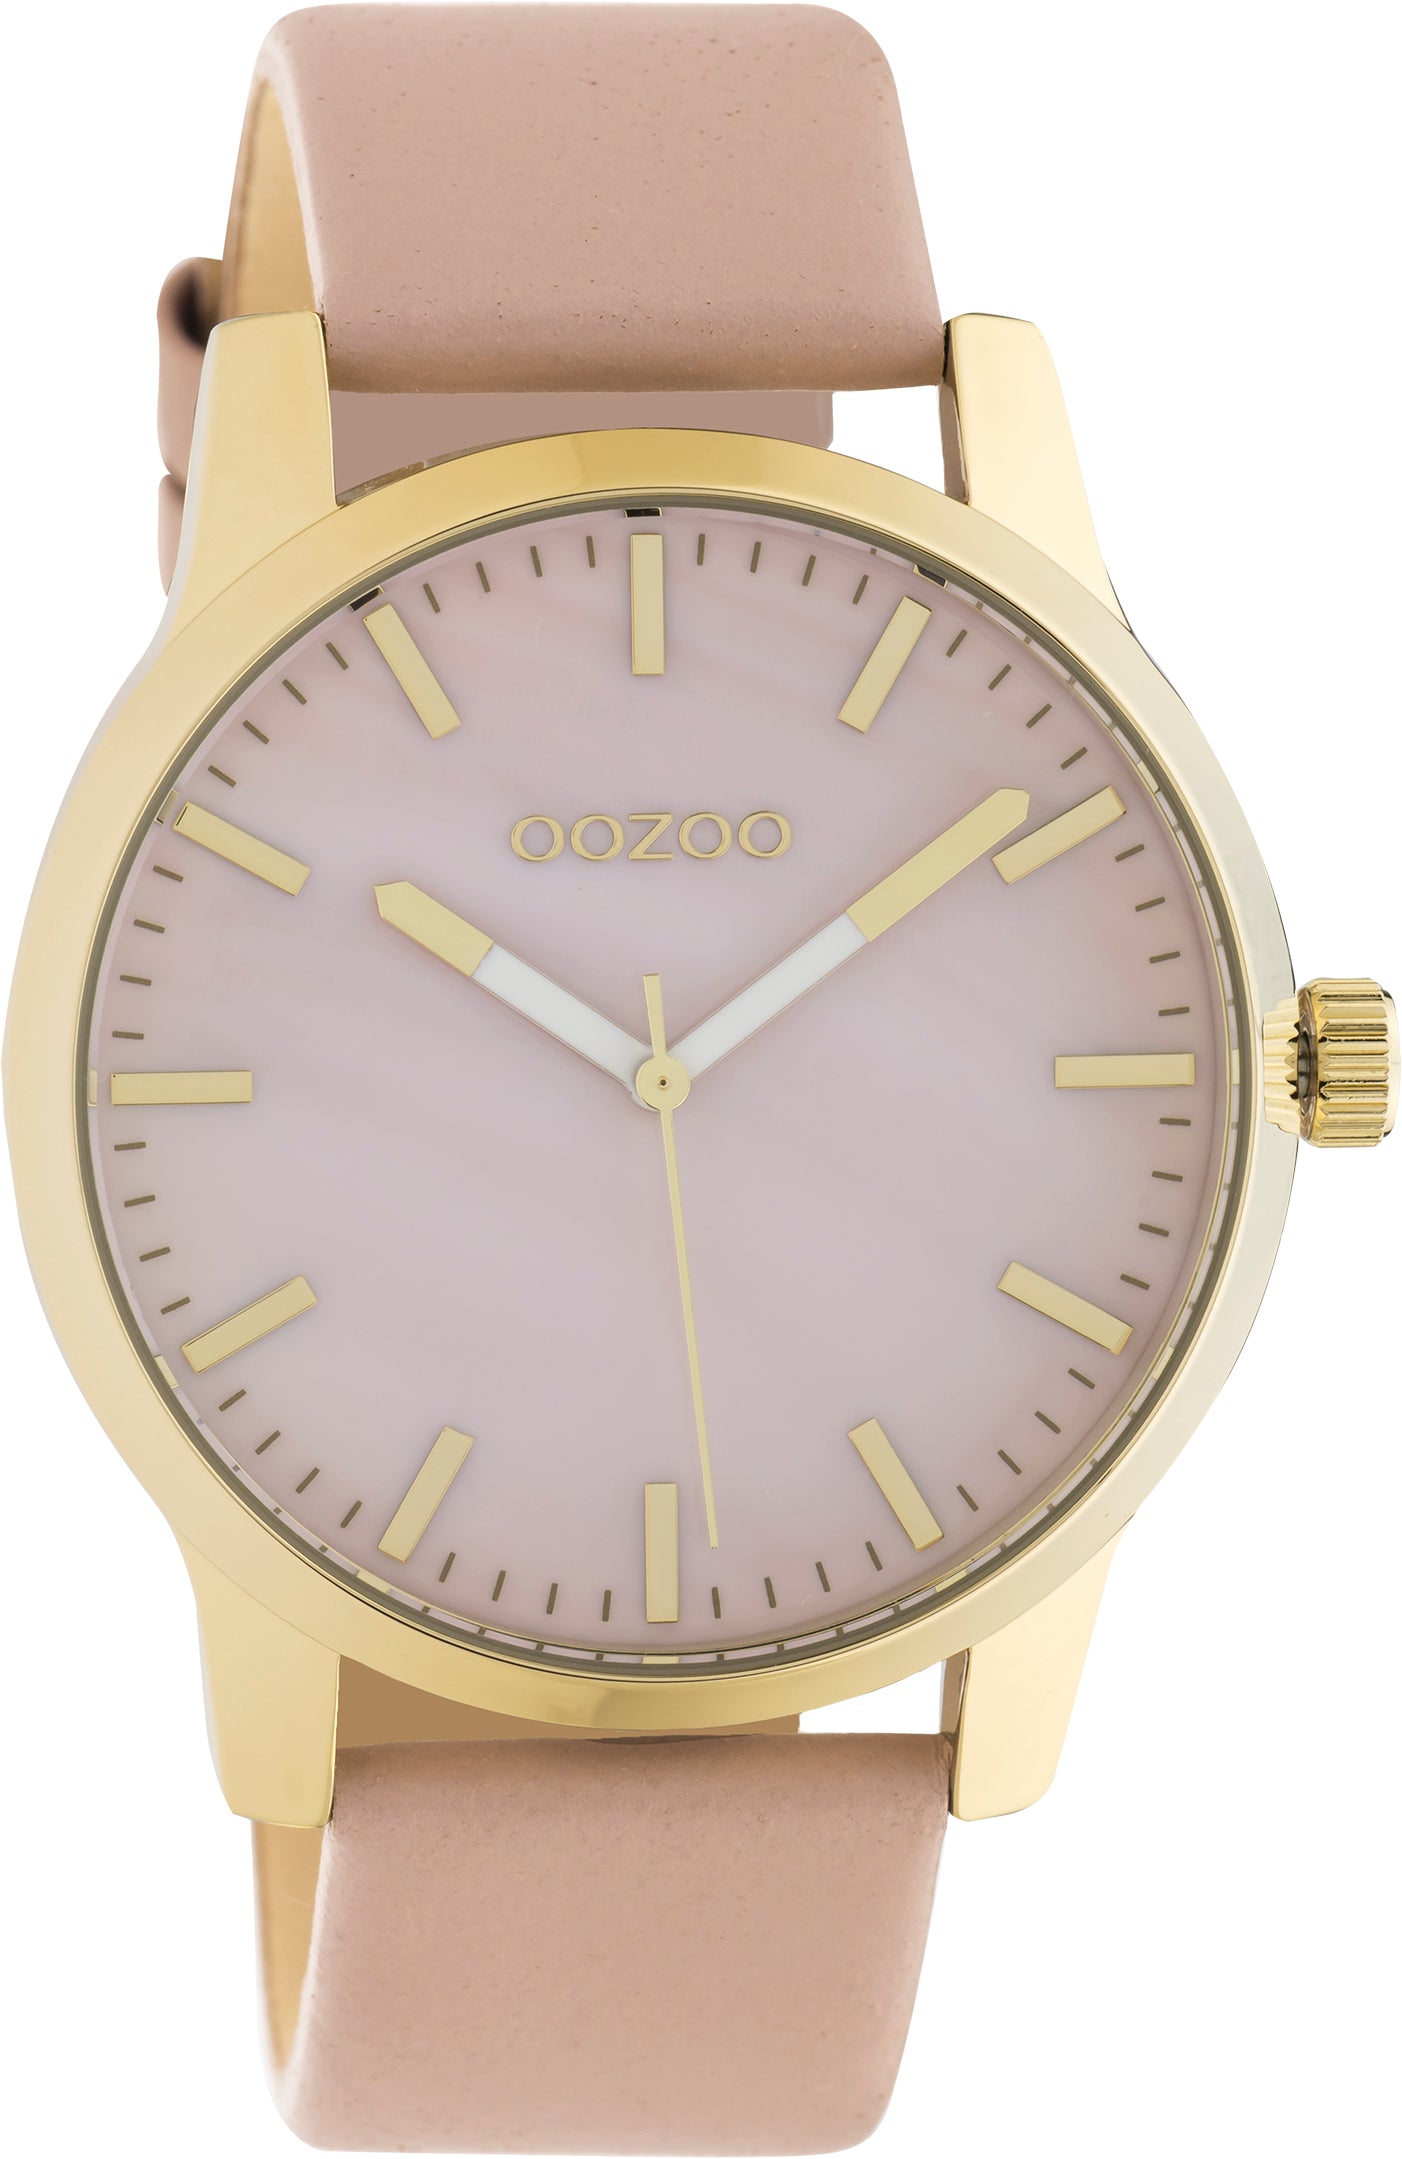 OOZOO 42mm Pink Grey Leather Watch